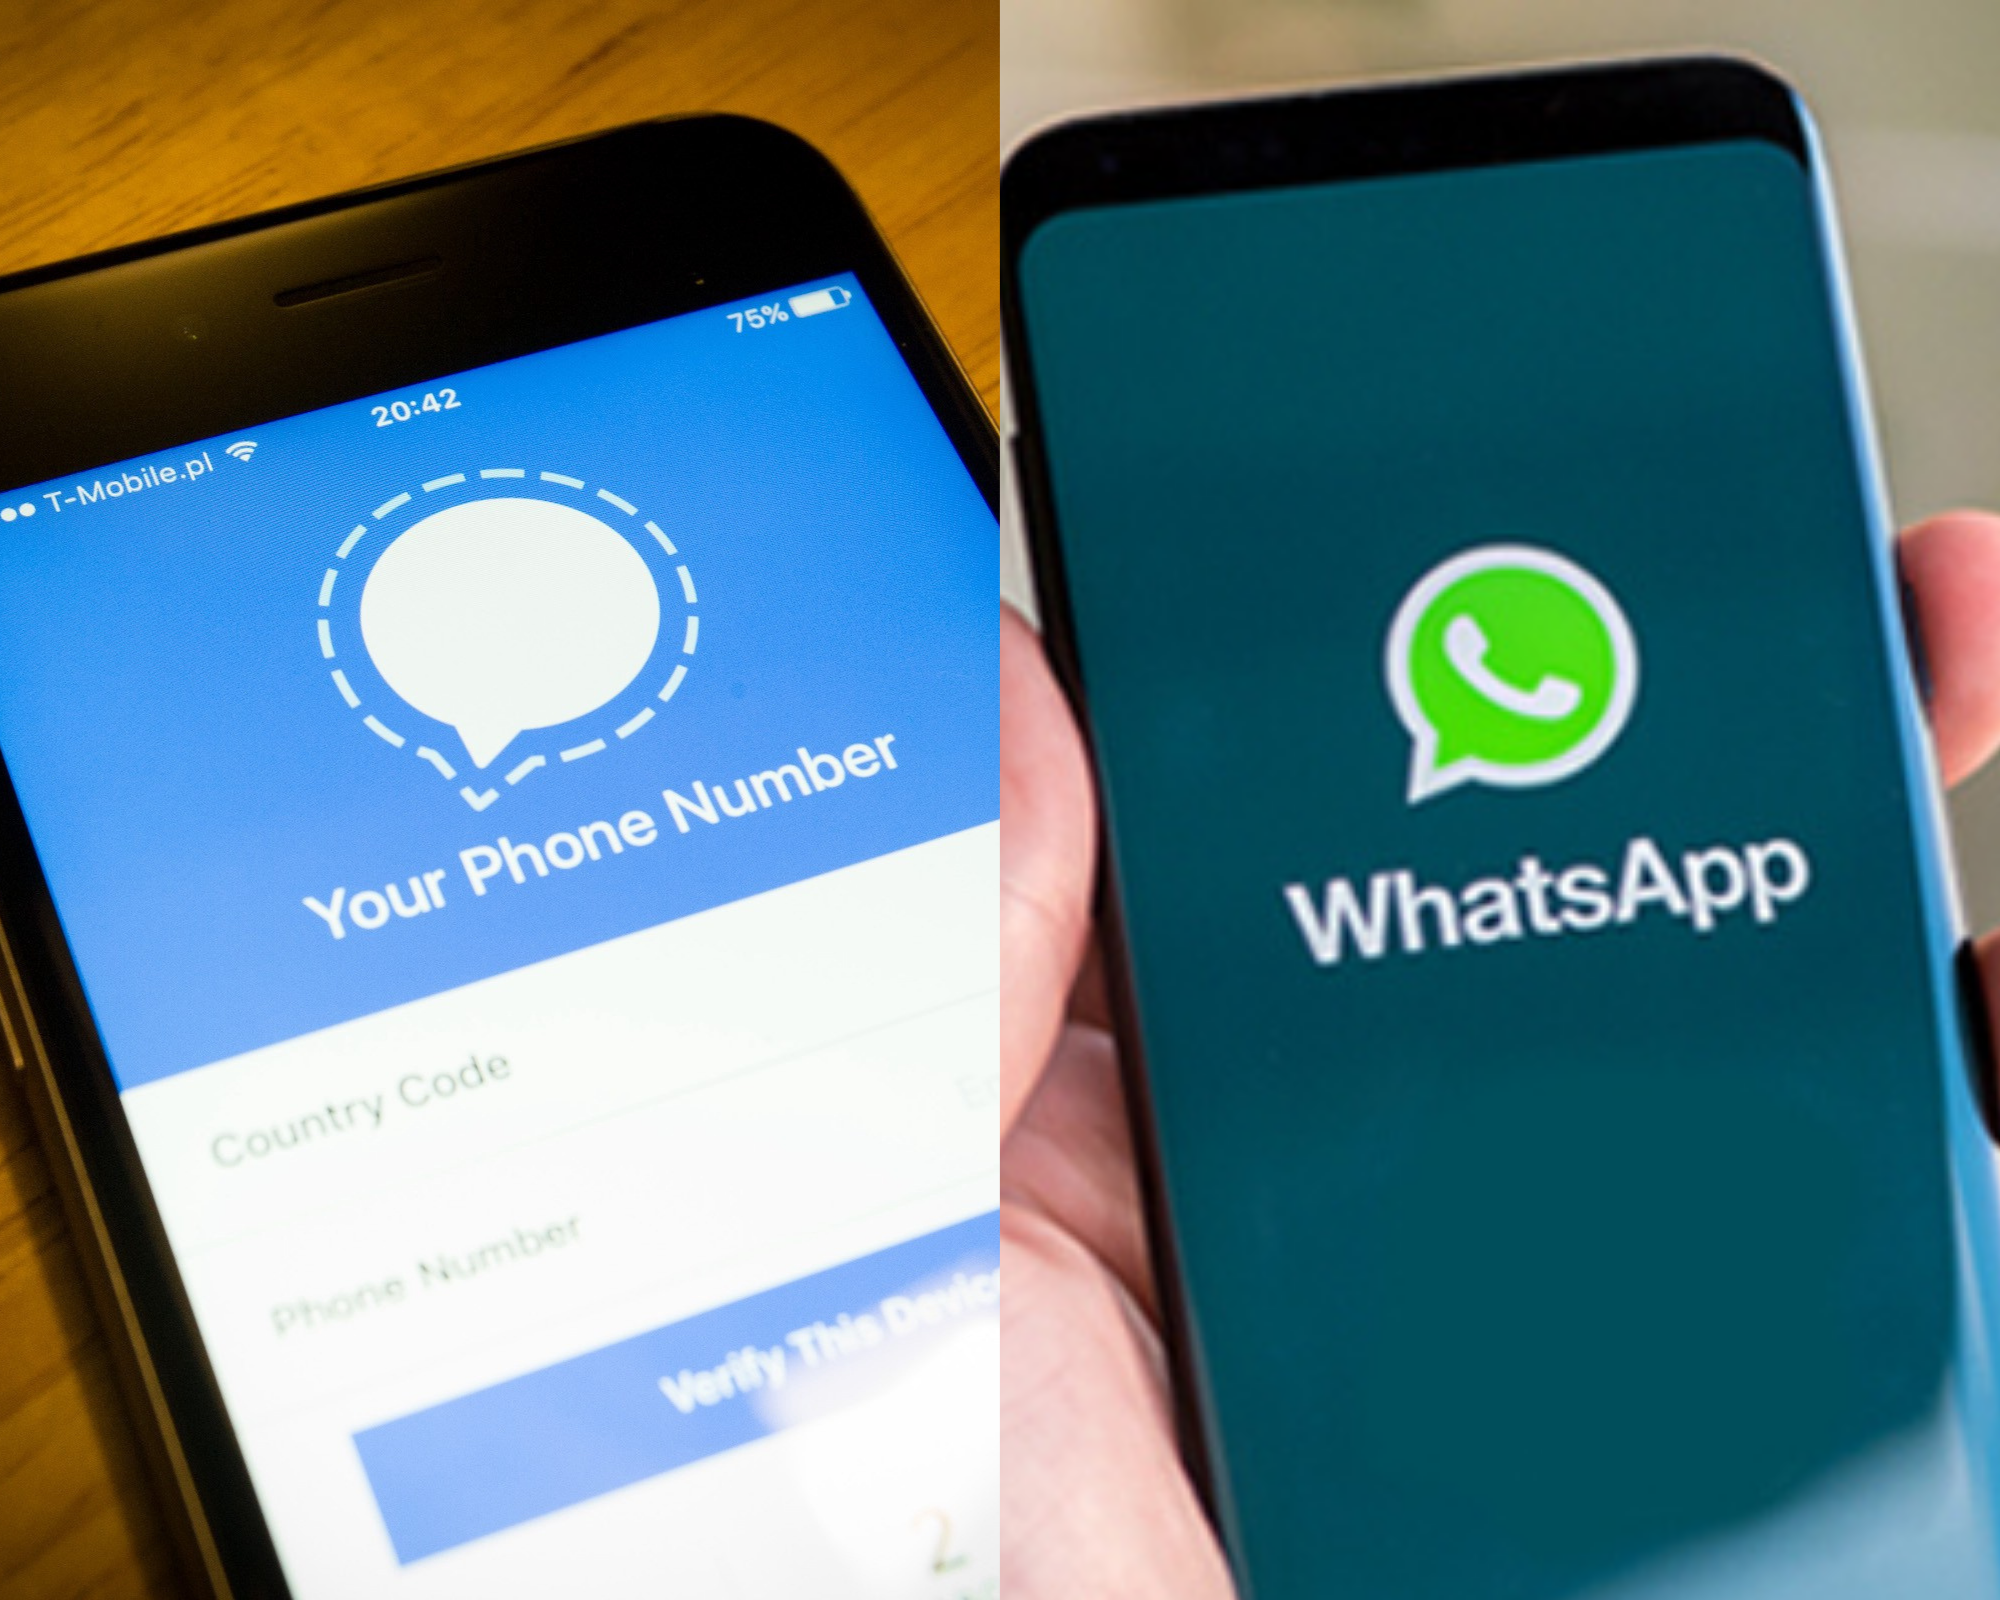 The Signal app displayed on a mobile device (left) versus Whatsapp